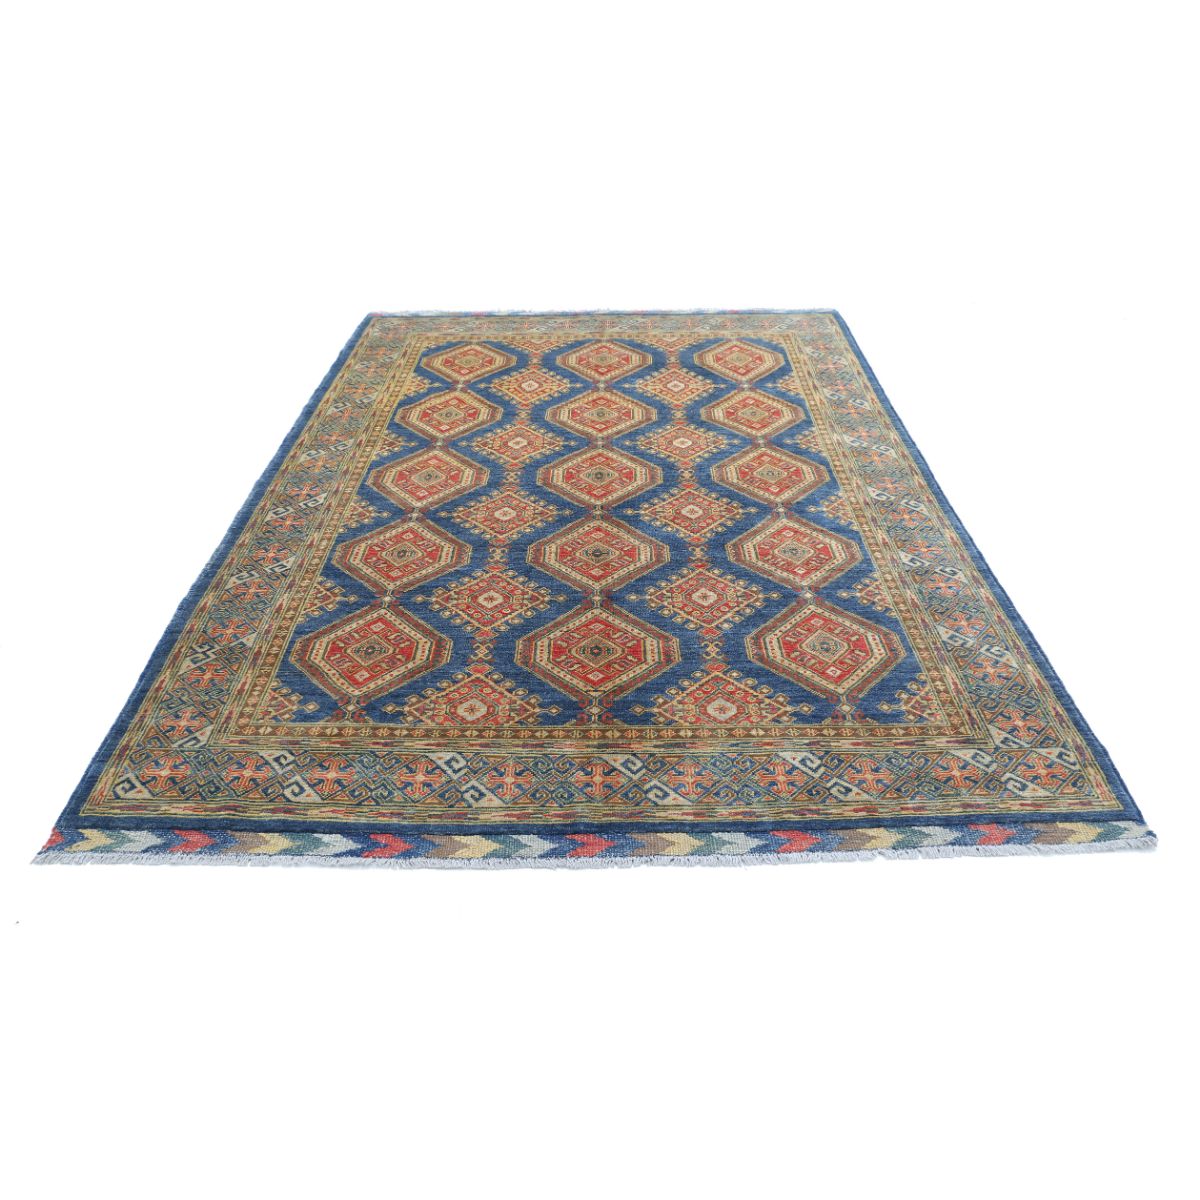 Revival 6' 7" X 9' 9" Wool Hand Knotted Rug